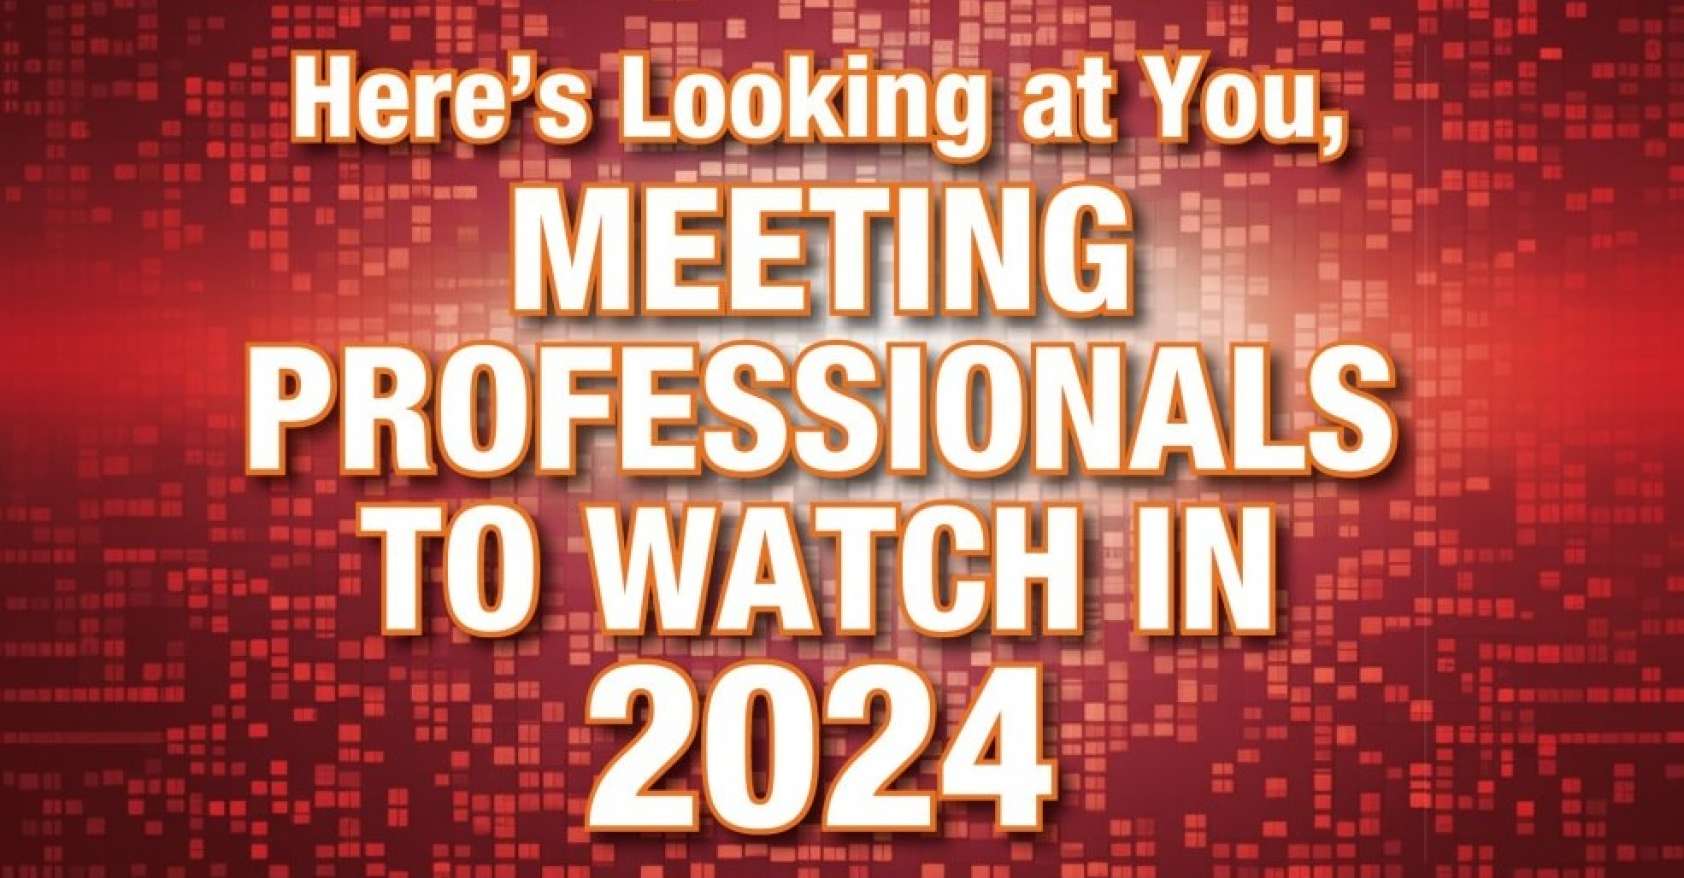 Here's Looking at You, Meeting Professionals to Watch in 2024 written in white and yellow lettering on top of red and black sparkly background